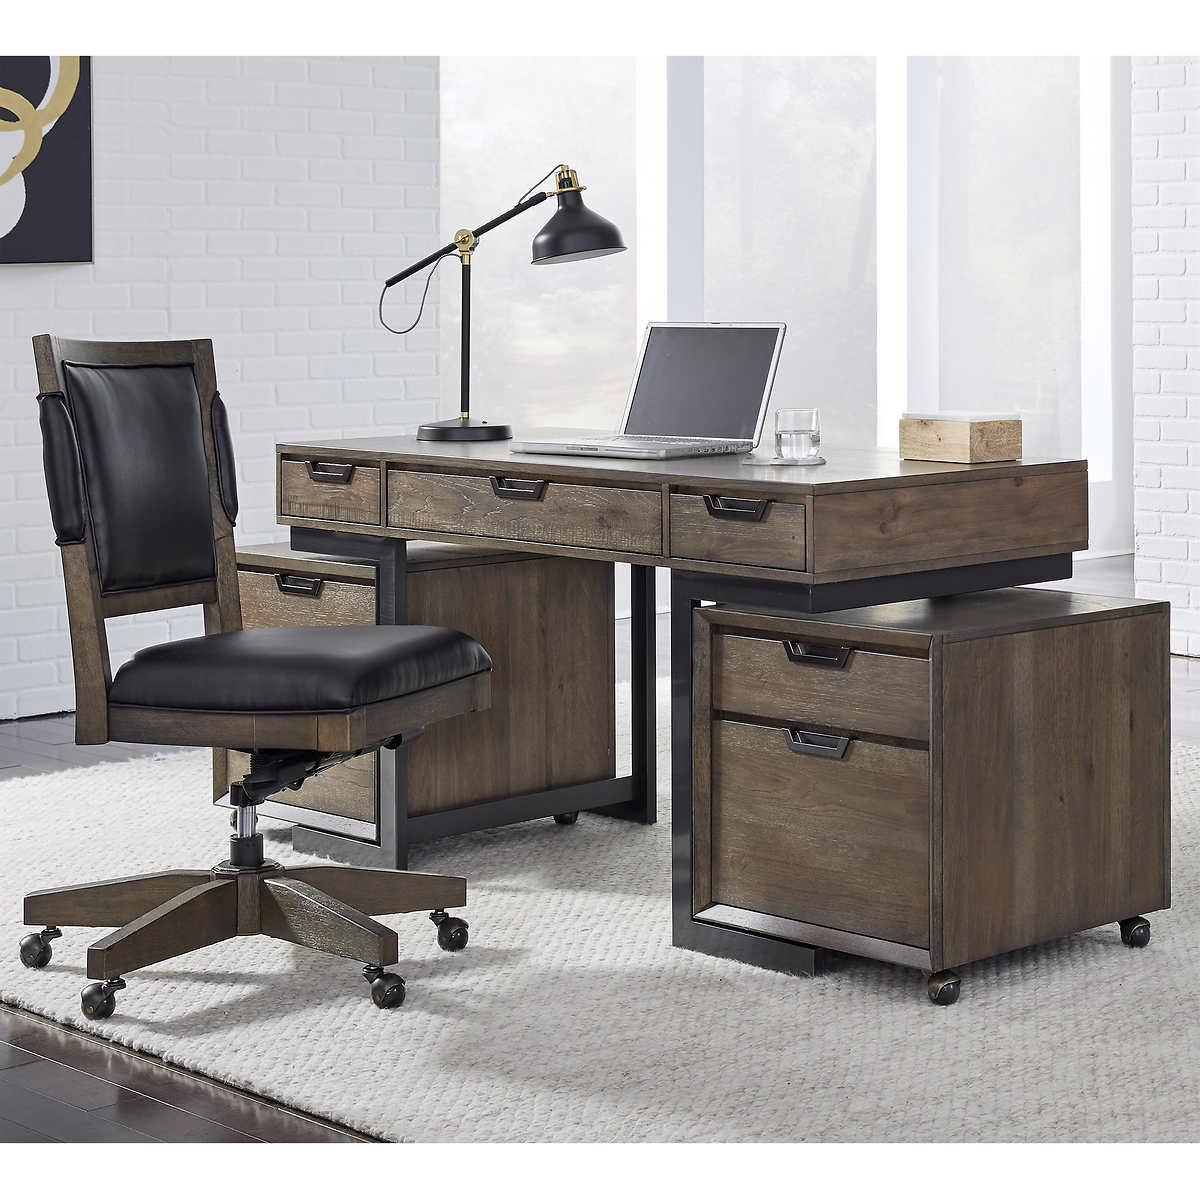 Asher 4 Piece Writing Desk With Rolling Files Chair